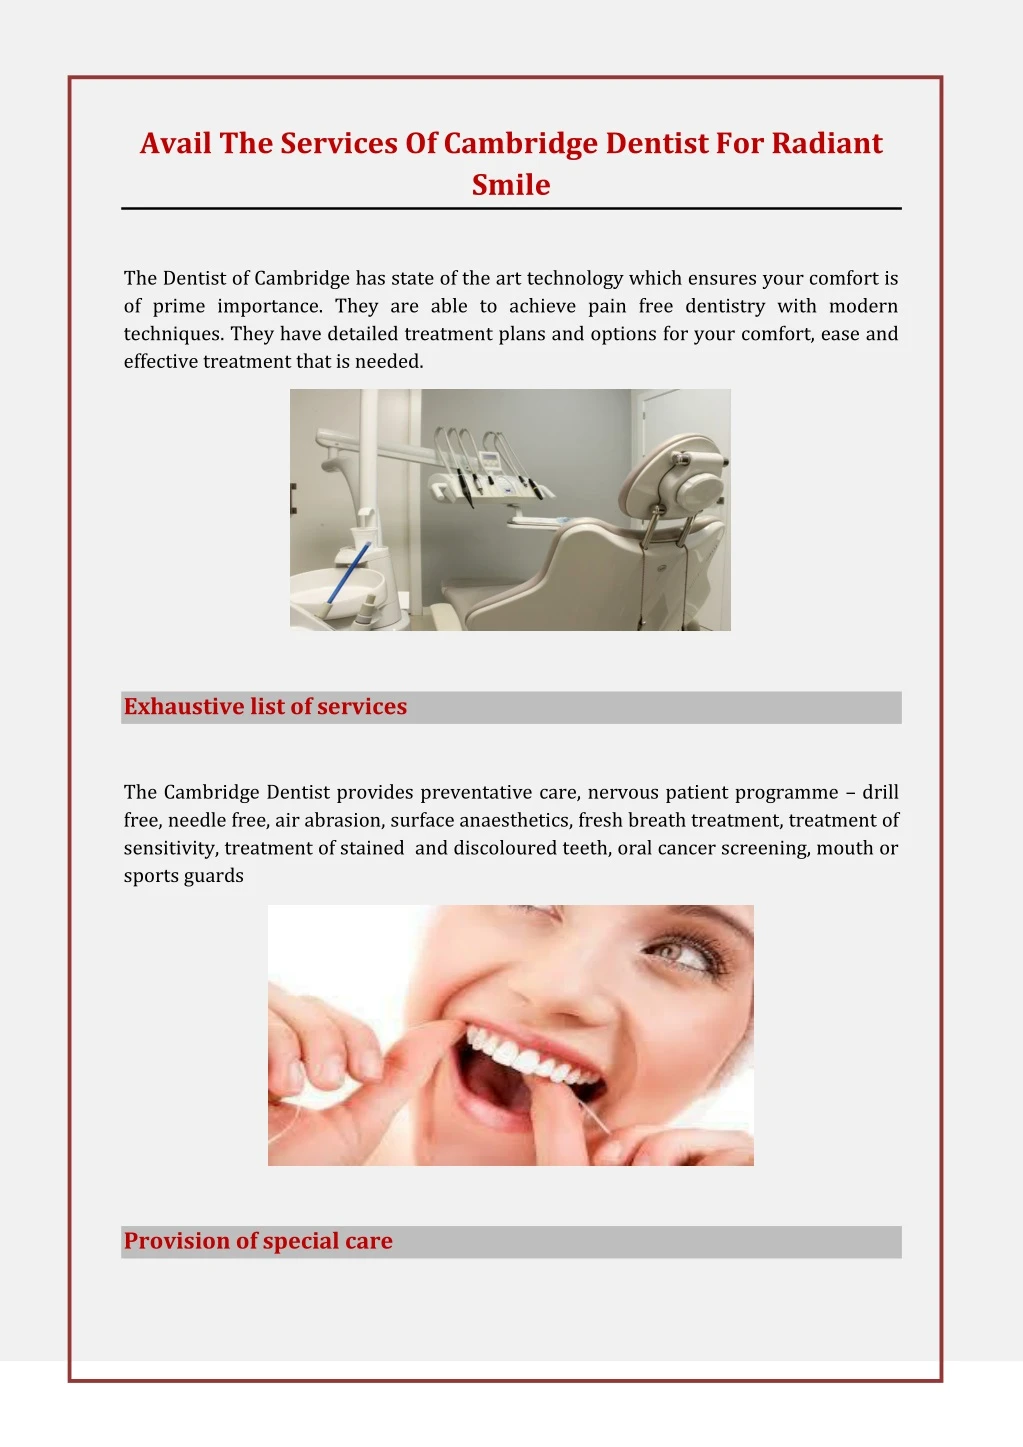 avail the services of cambridge dentist